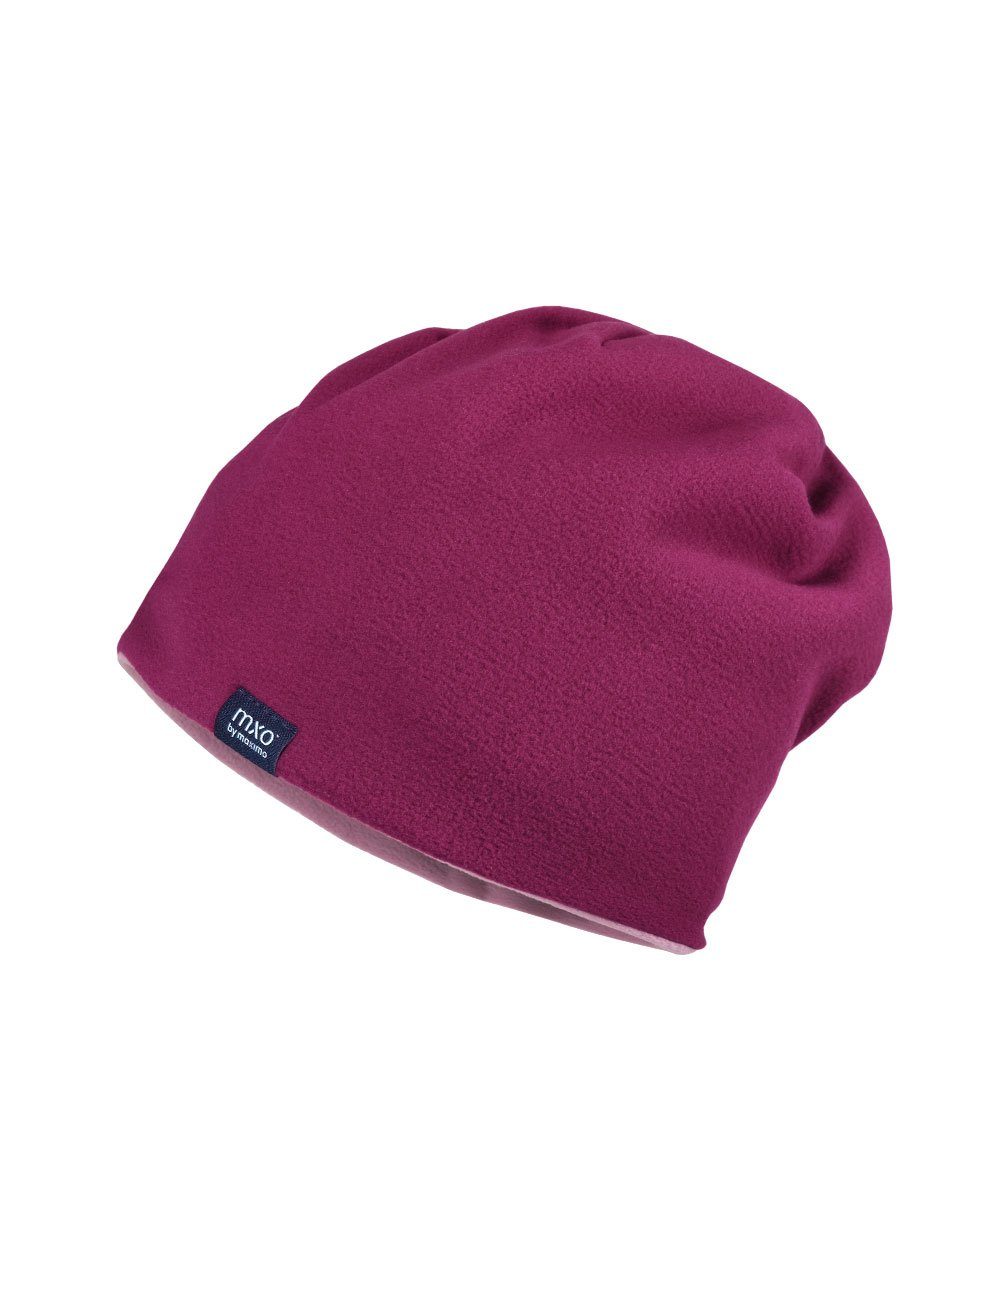 MAXIMO Beanie Beanie, Fleece two-one Made in Germany brombeere/lilas